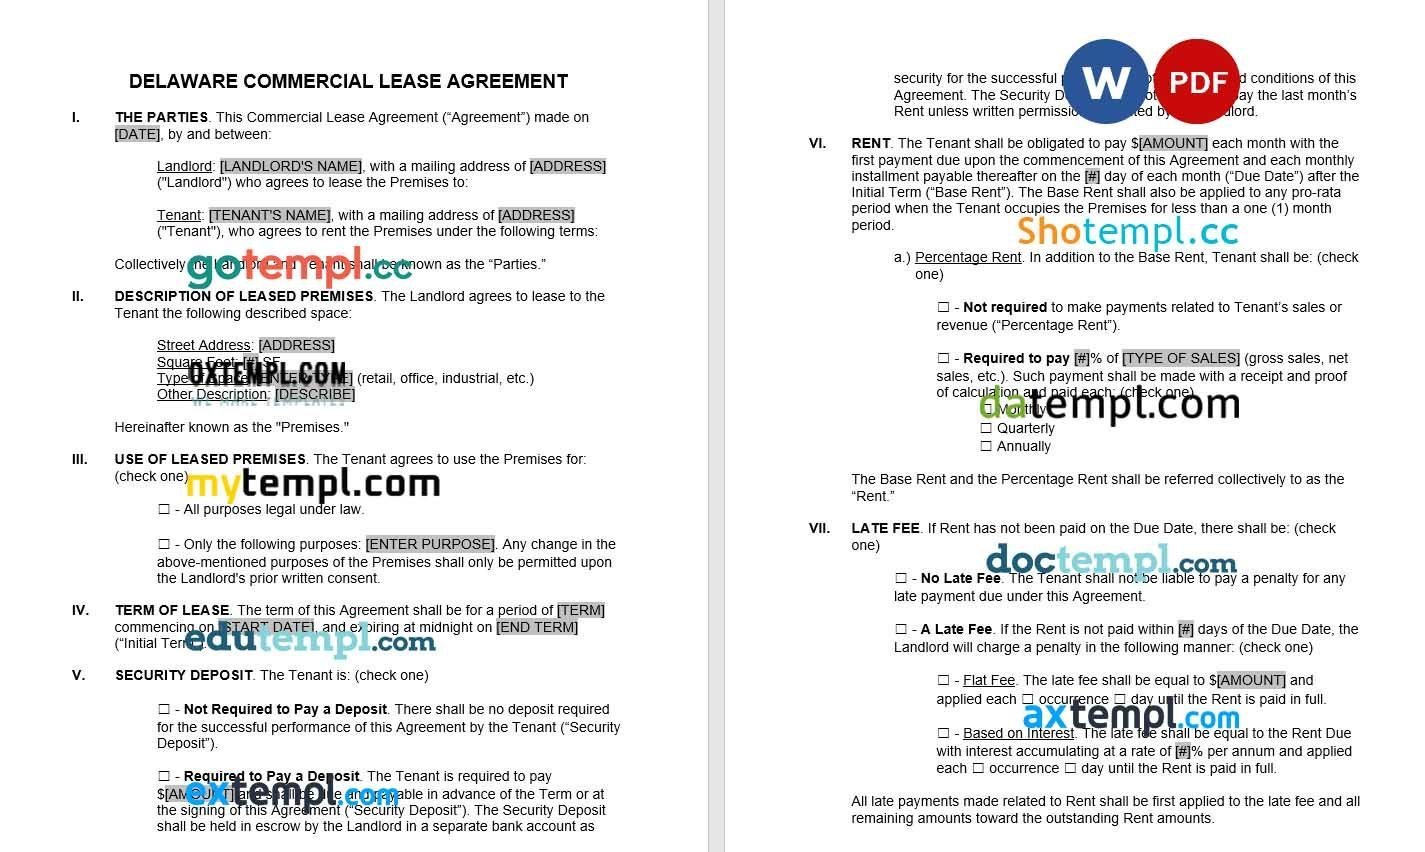 Delaware Commercial Lease Agreement Word example, fully editable